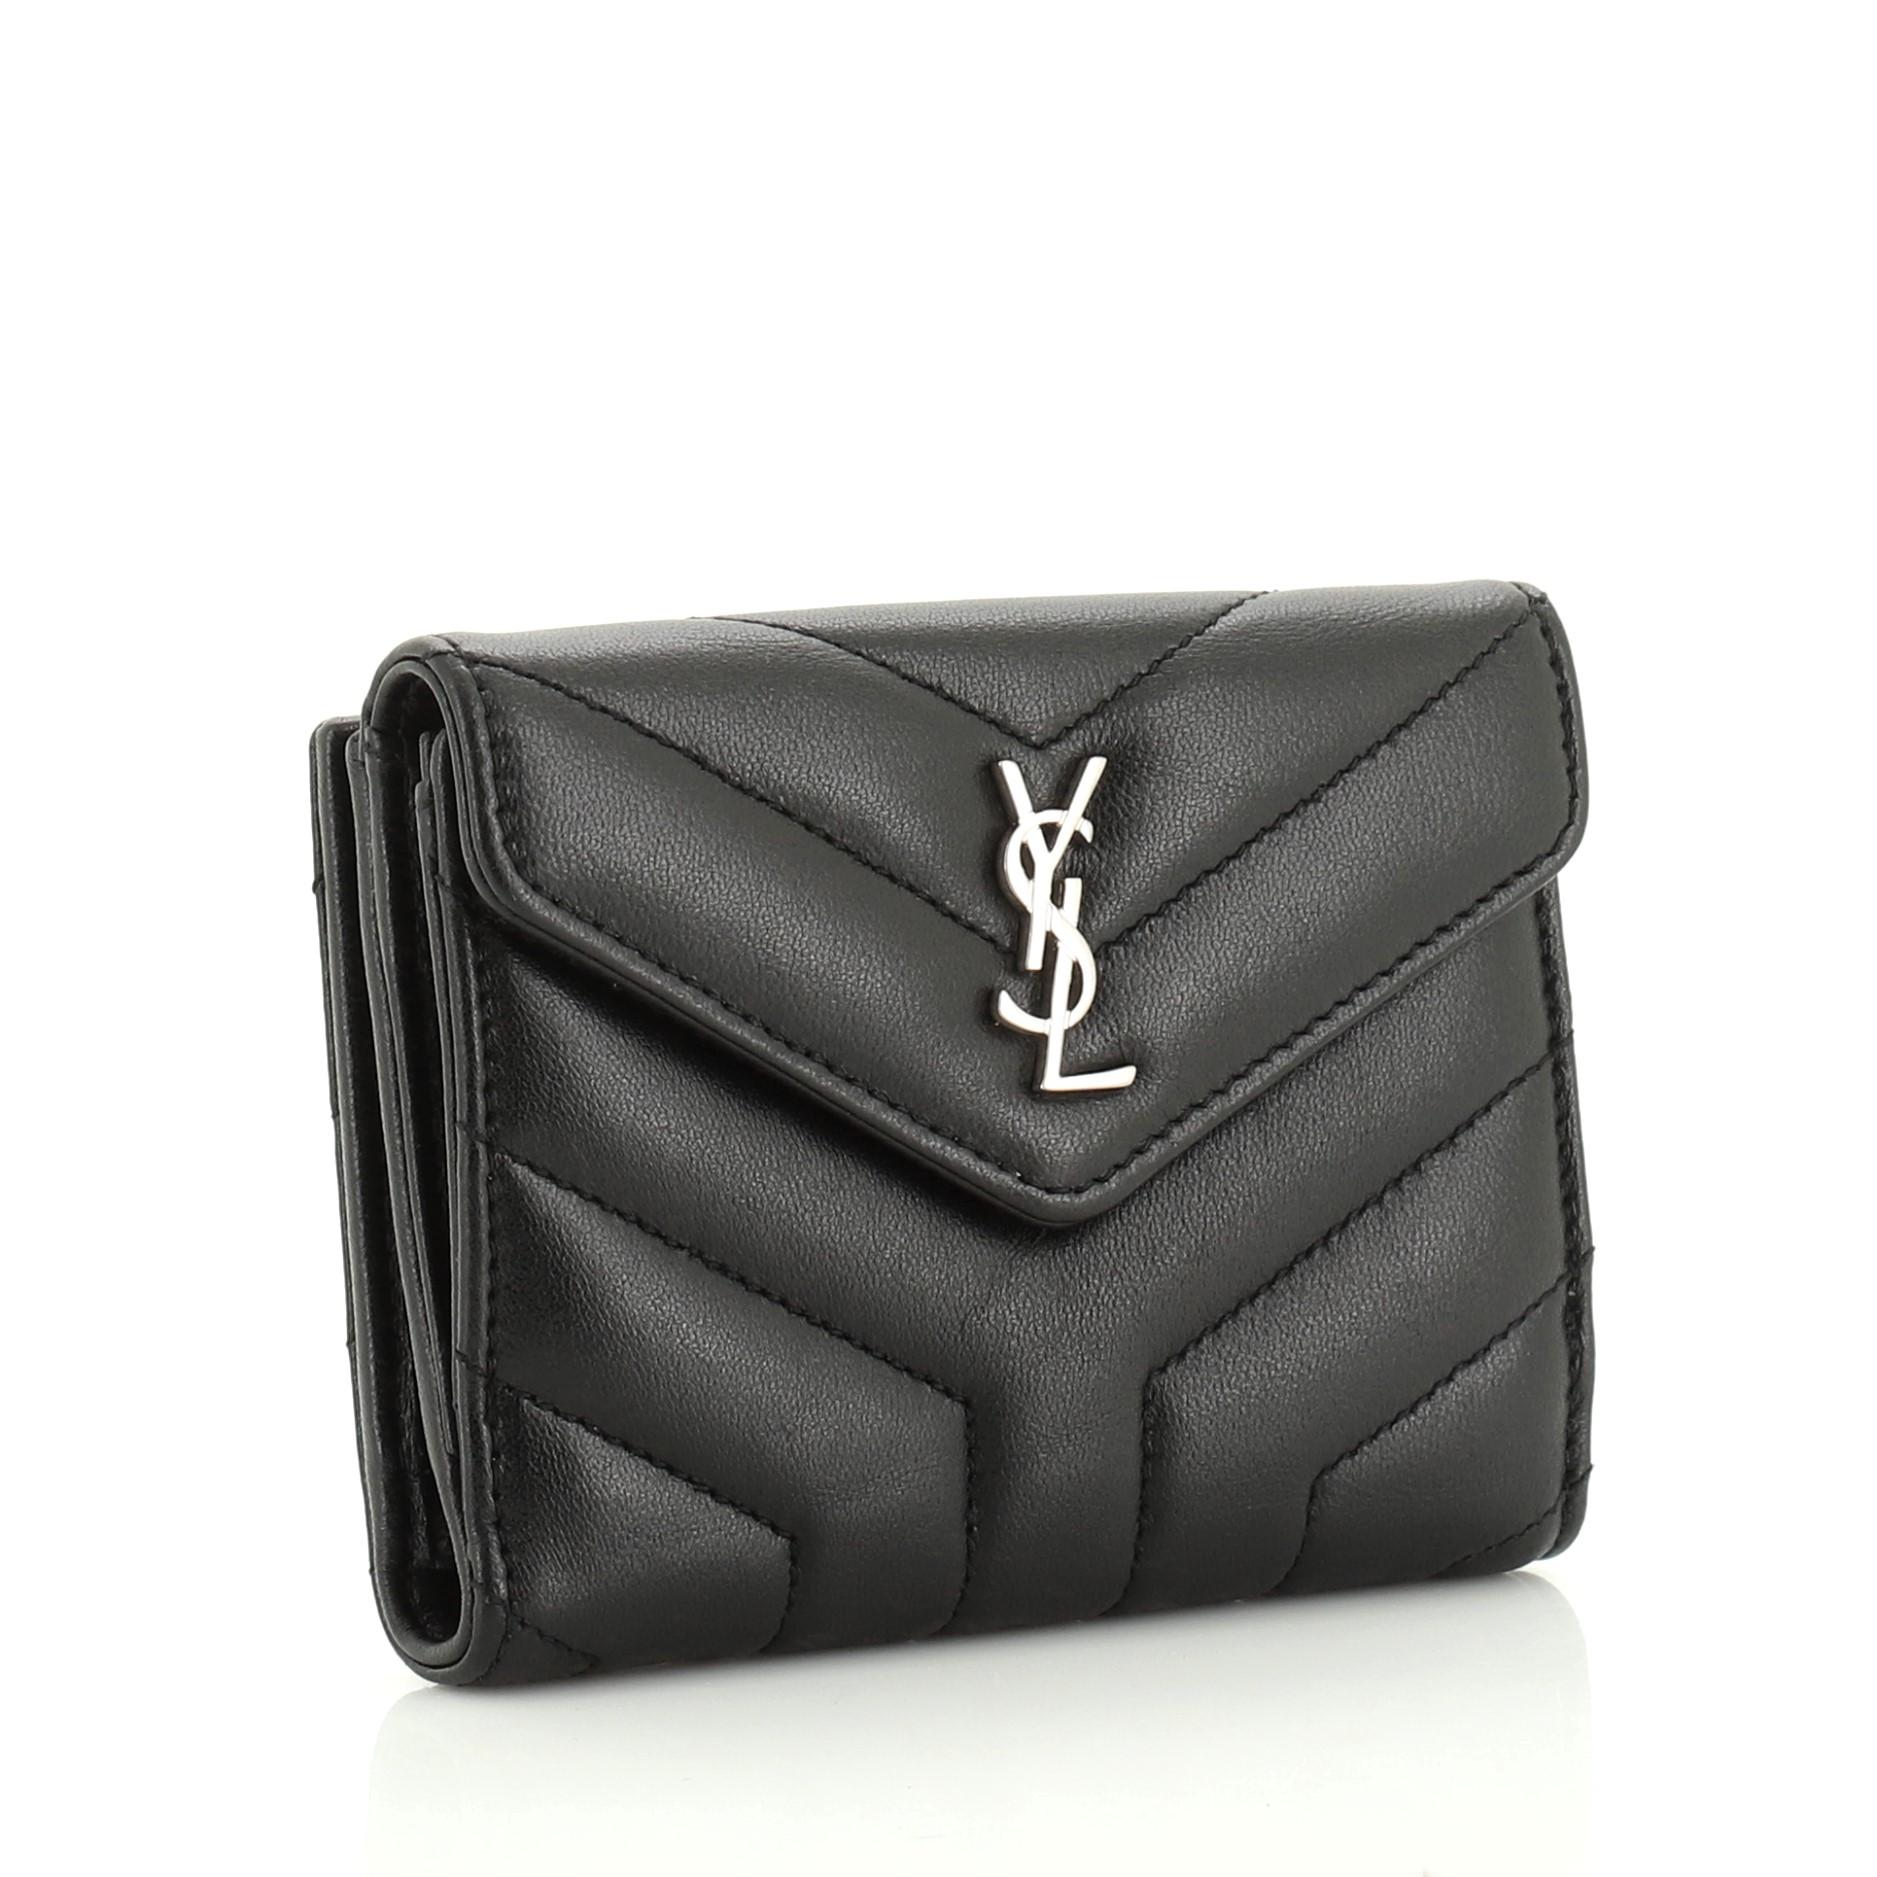 This Saint Laurent Loulou Wallet Matelasse Chevron Leather Small, crafted in black matelasse chevron leather, features envelope flap design with YSL logo and silver-tone hardware. Its snap button closure opens to a black leather interior with